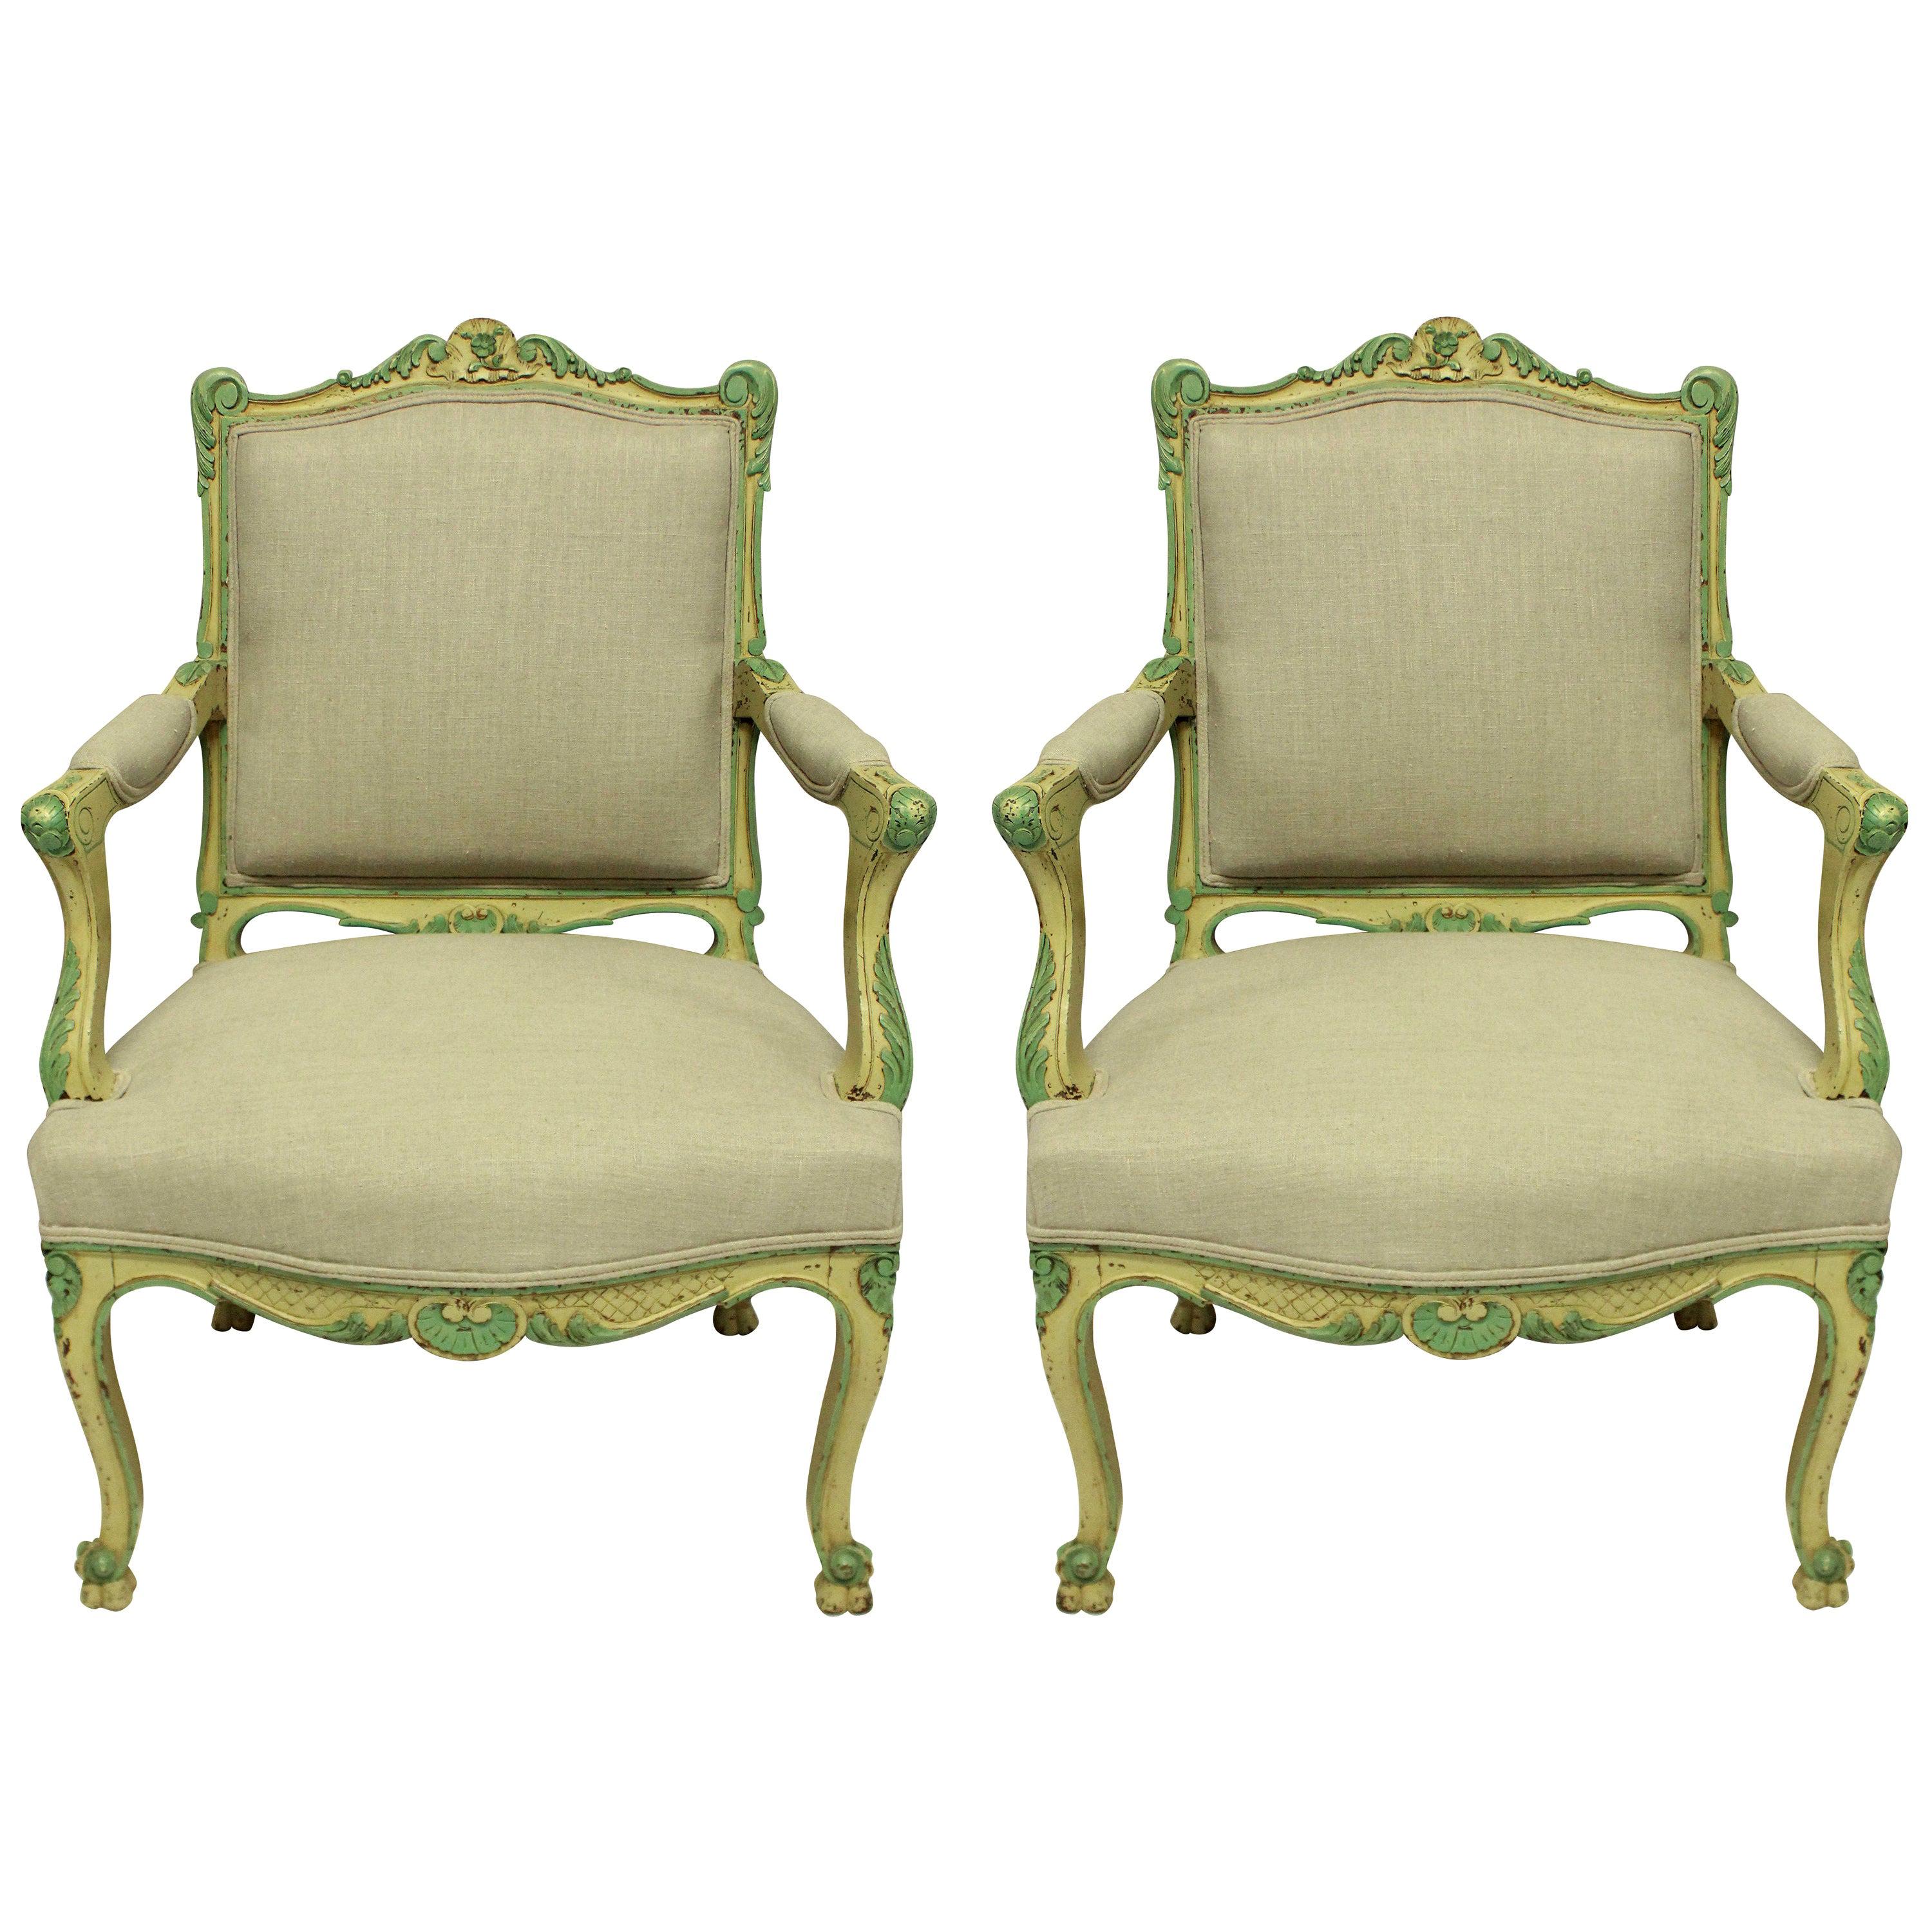 Pair of Louis XV Style Armchairs in Pale Yellow and Green Paints